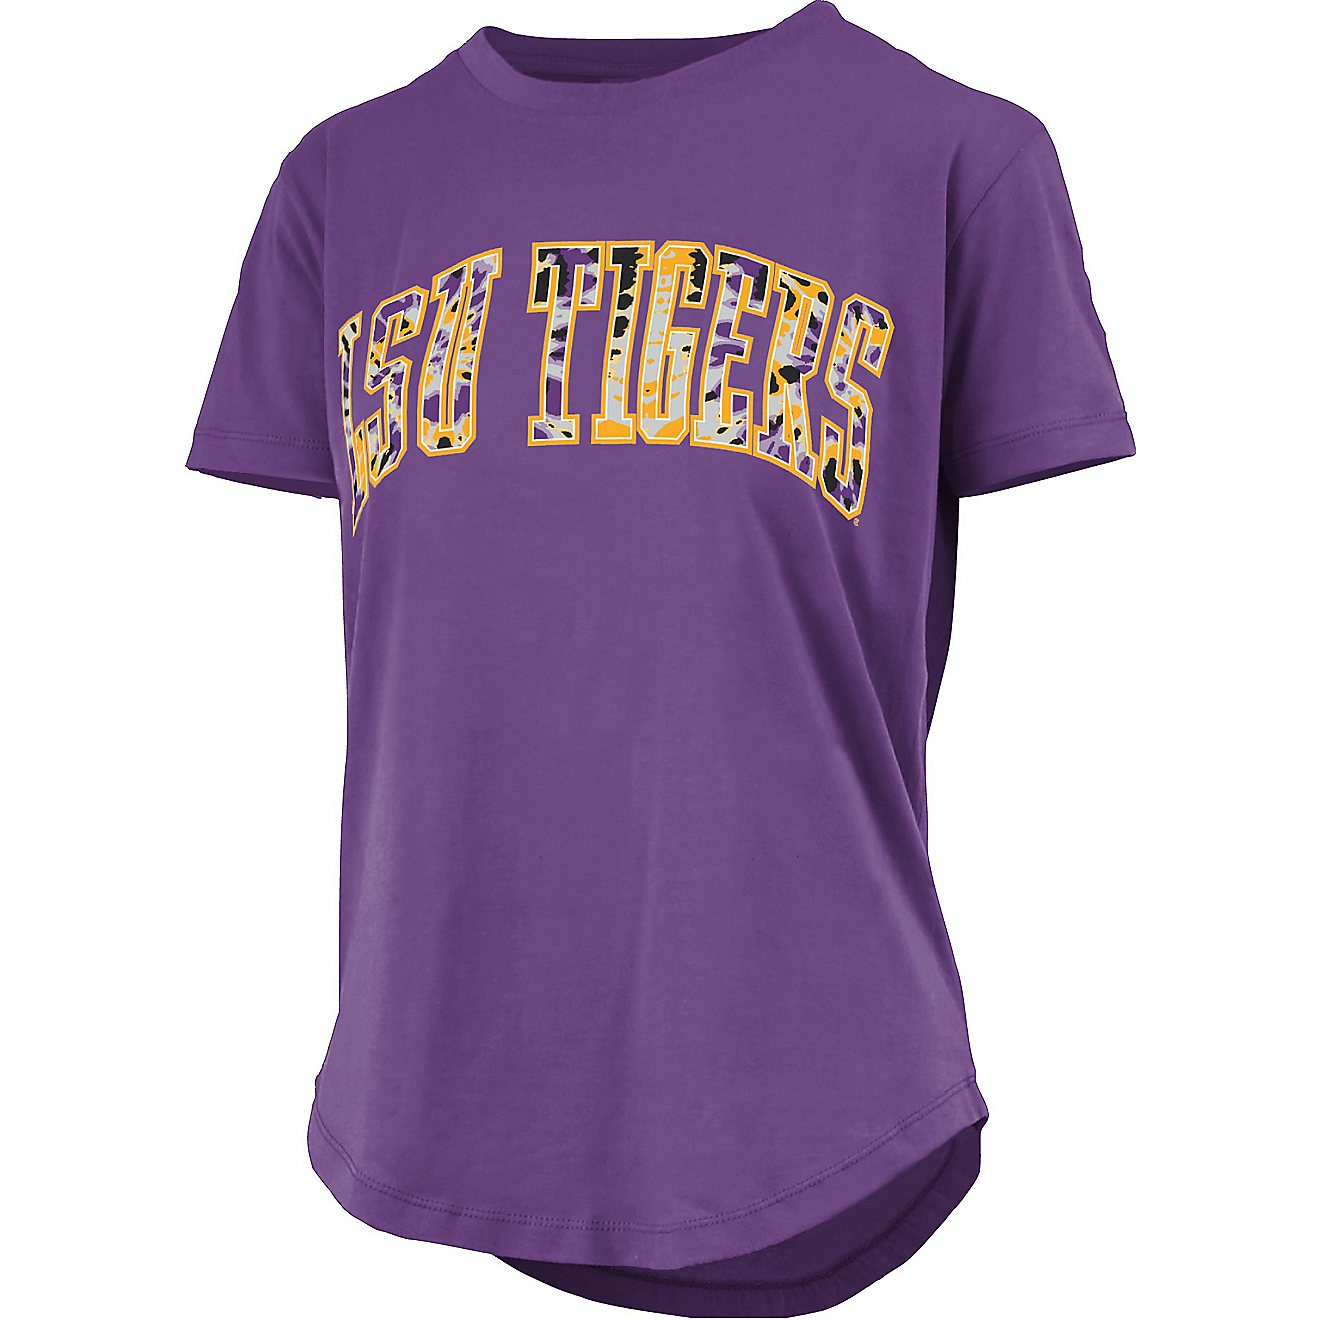 Three Square Women's Louisiana State University Campus Tie Dye T-shirt                                                           - view number 1